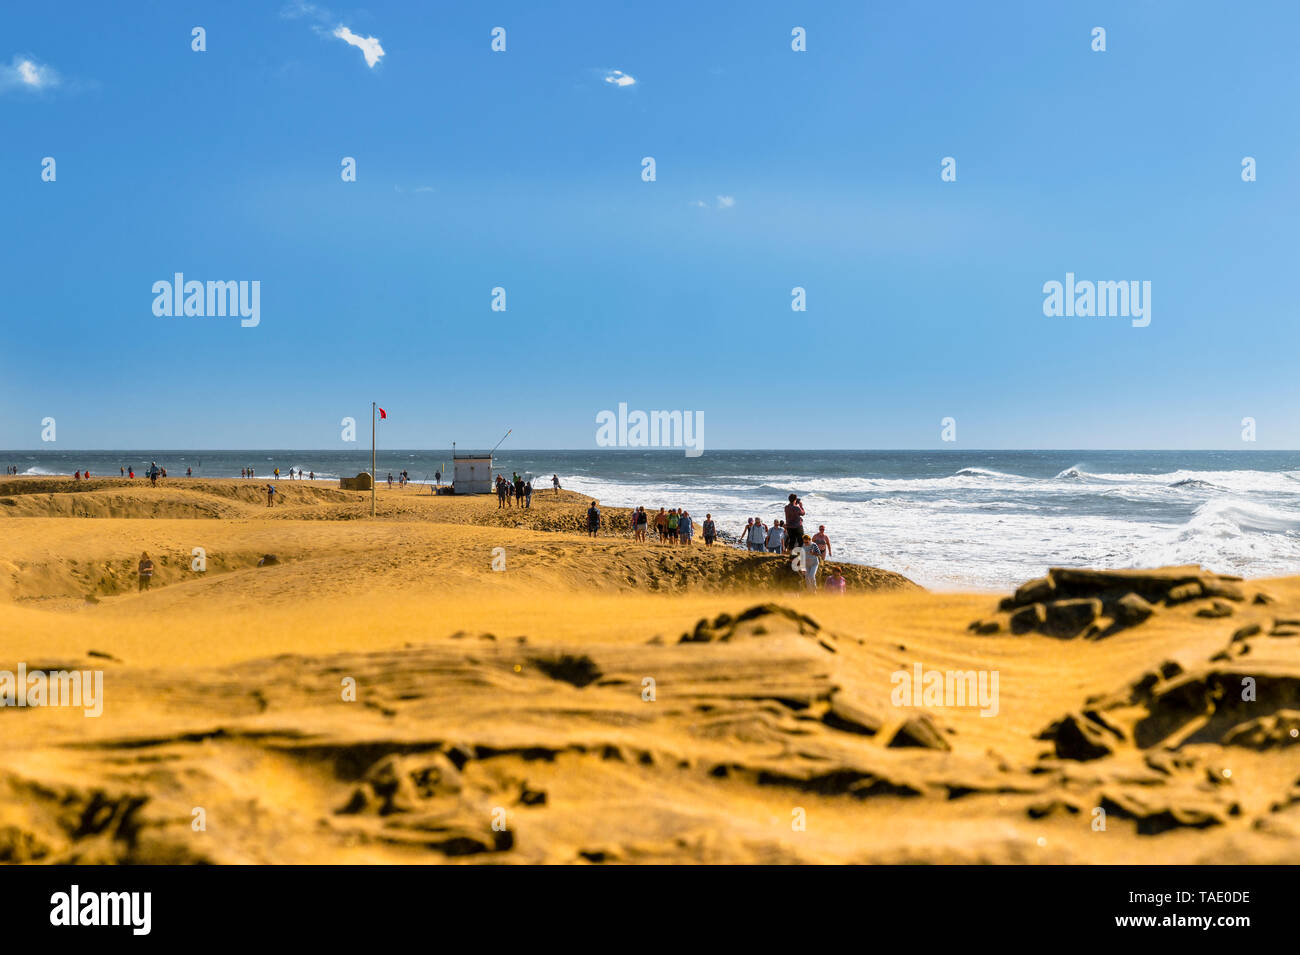 Spain, Canary Islands, Gran Canaria, Maspalomas, beach hiking during stormy weather Stock Photo